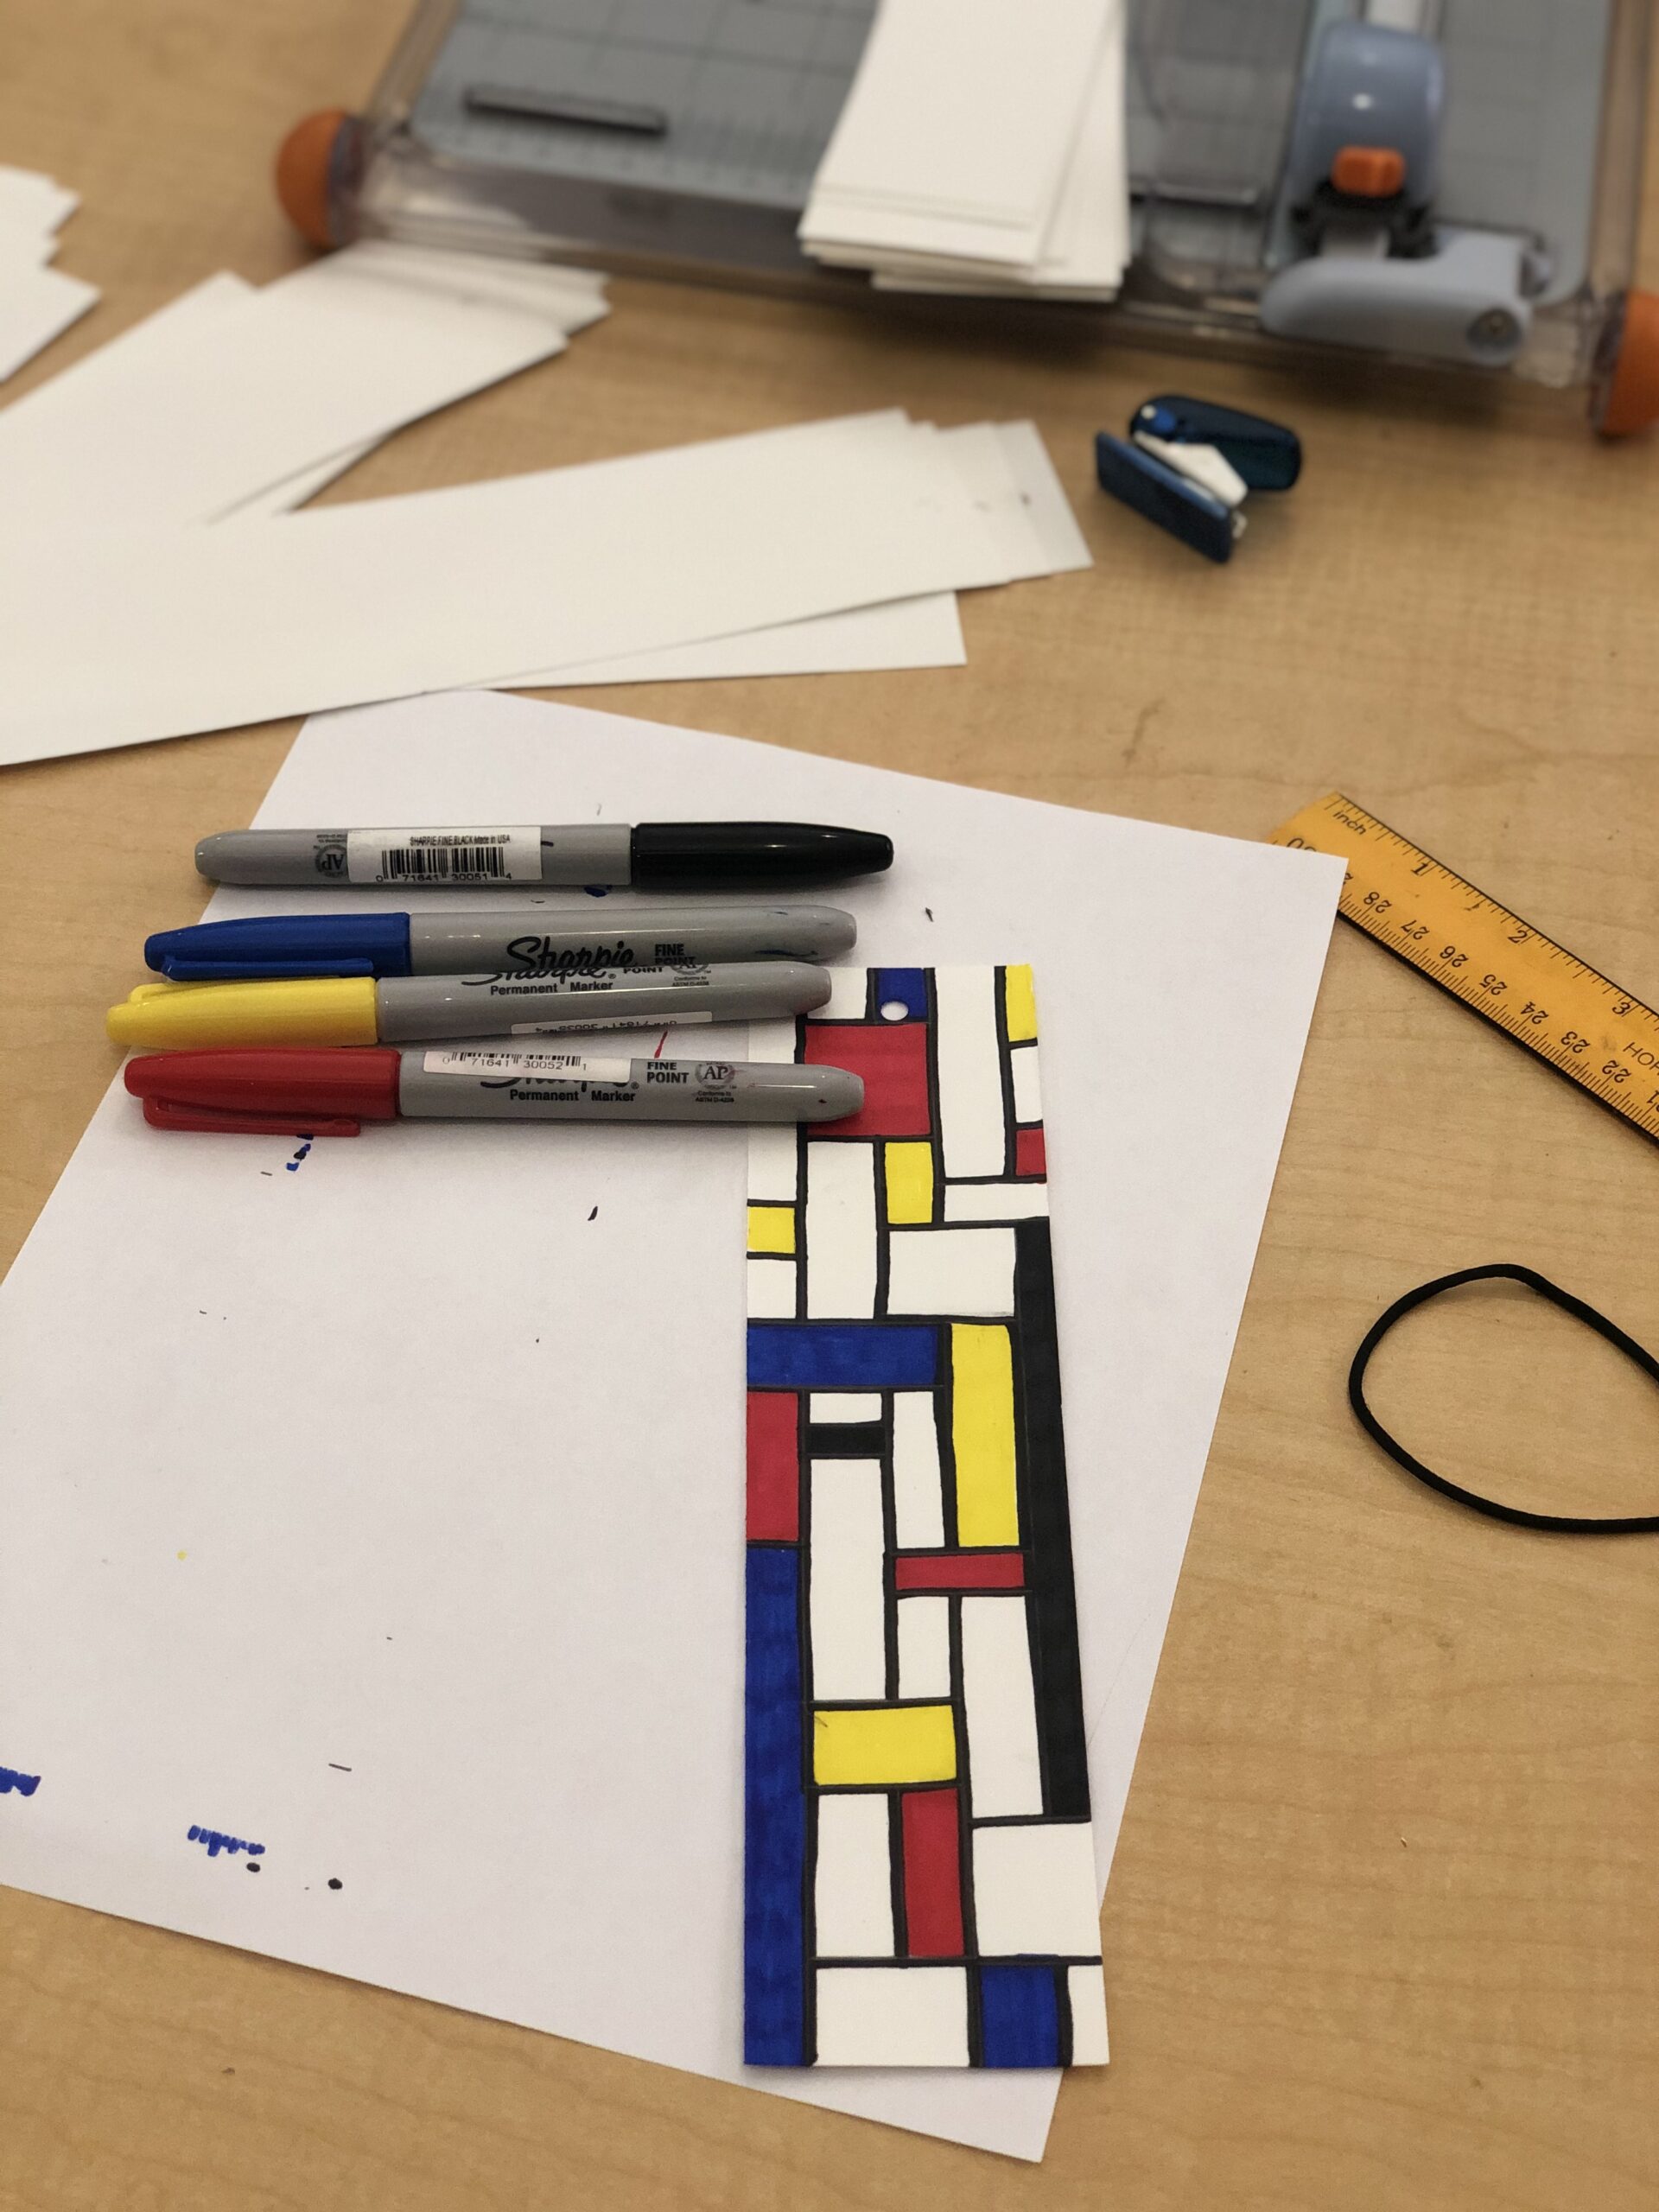 Creating ways to think about abstract art while learning about Piet Mondrian